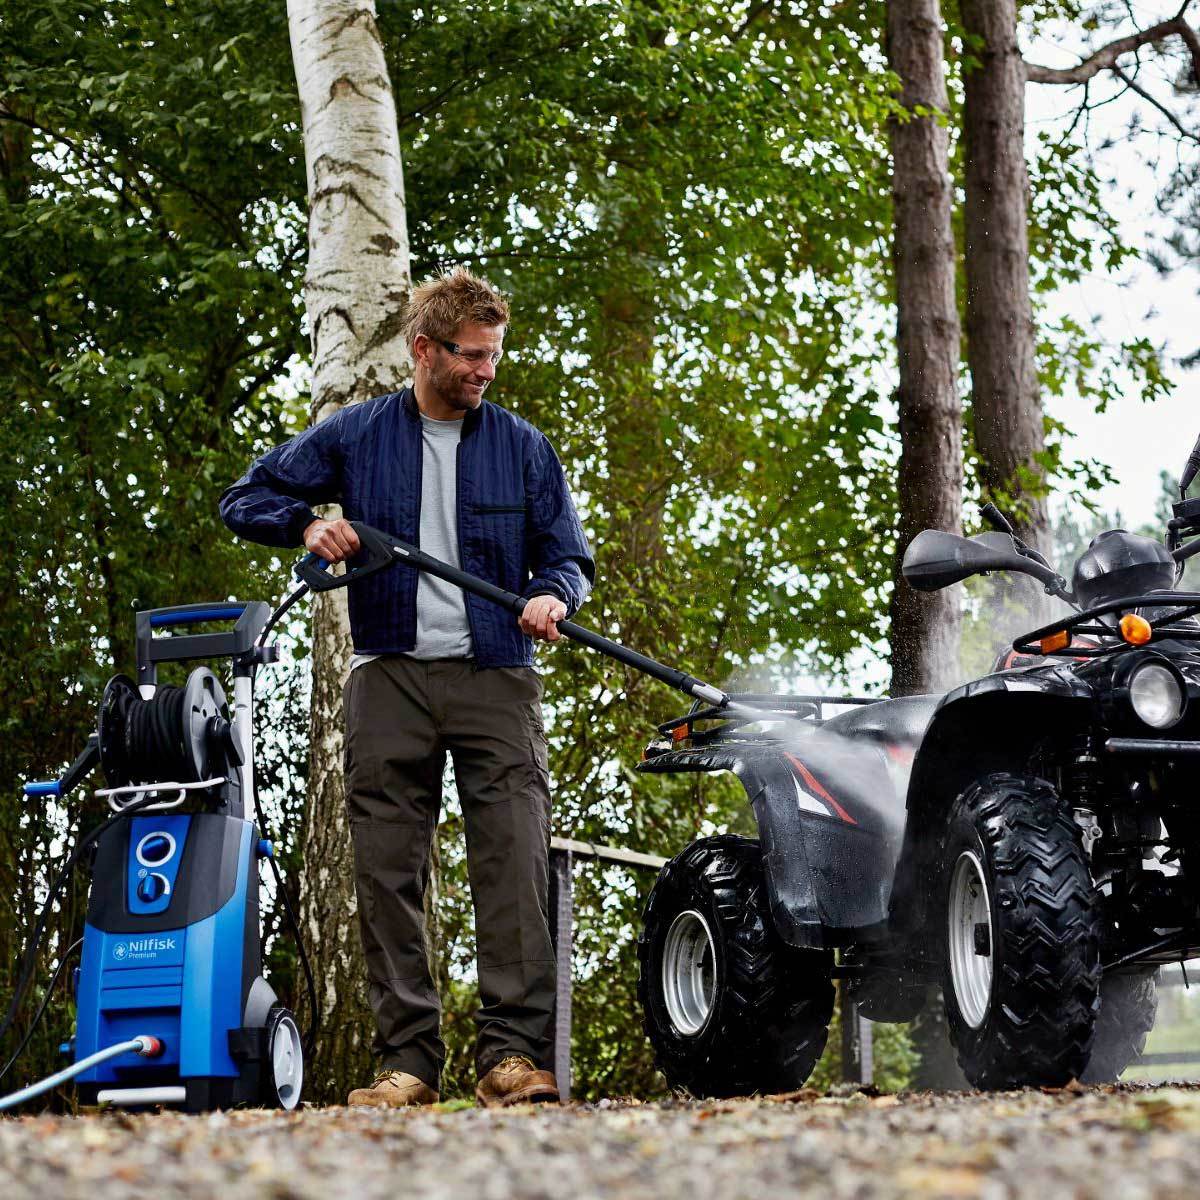 Lifestyle image of pressure washer being used to clean ATV